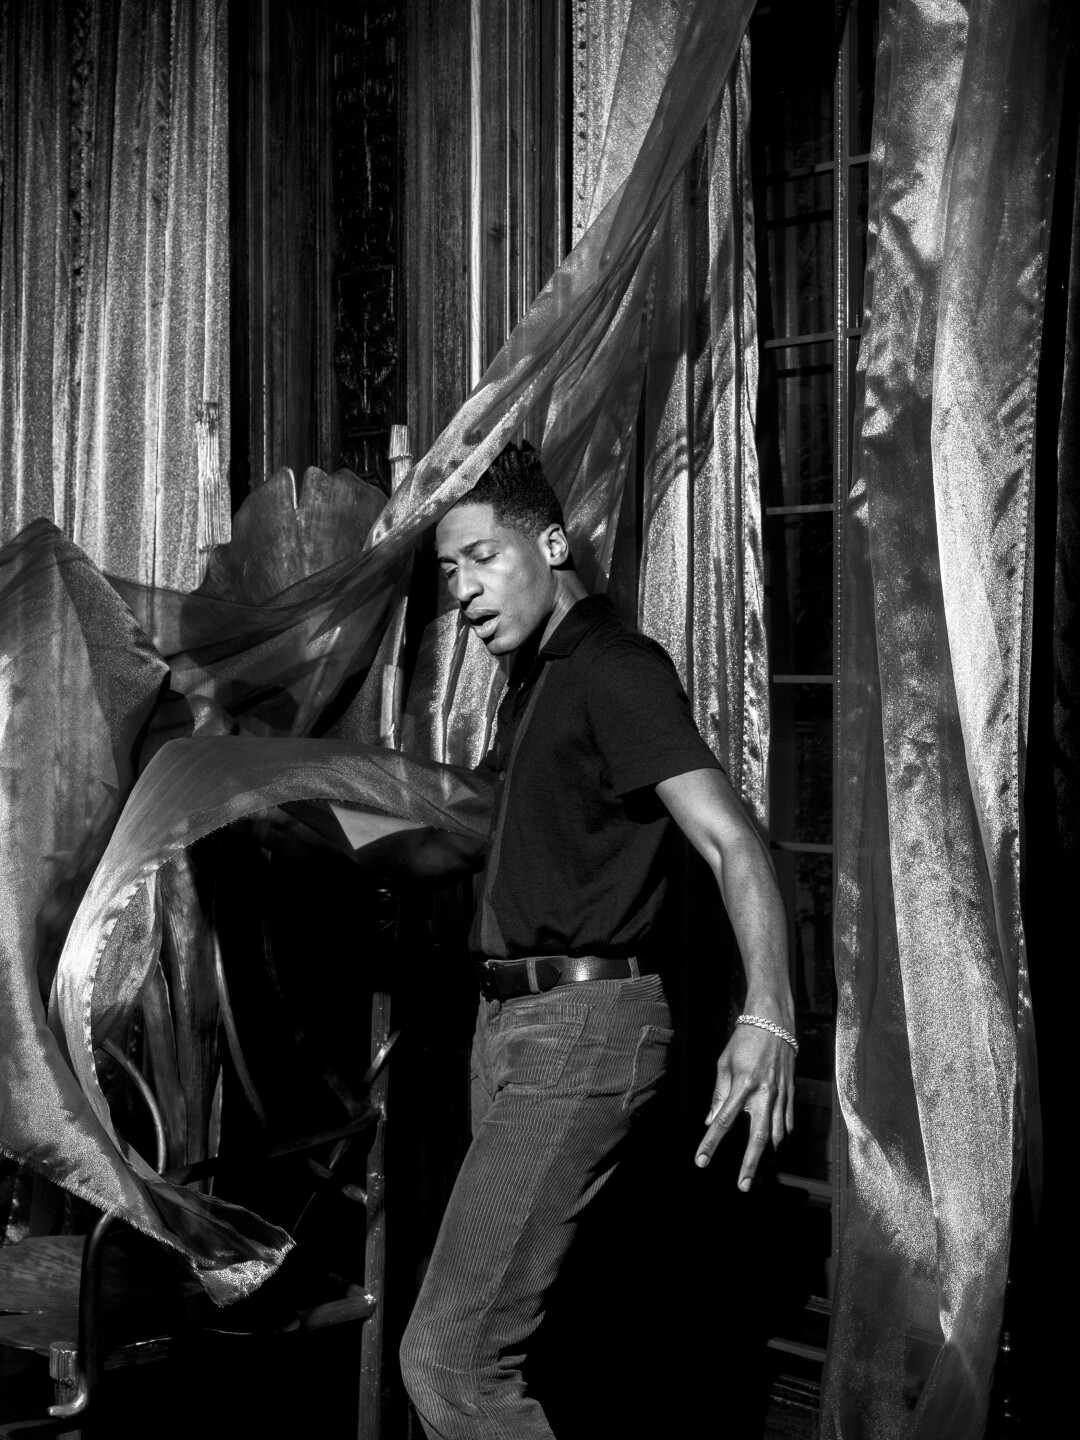 A man in a dark shirt and gold chain dances with sheer curtains.